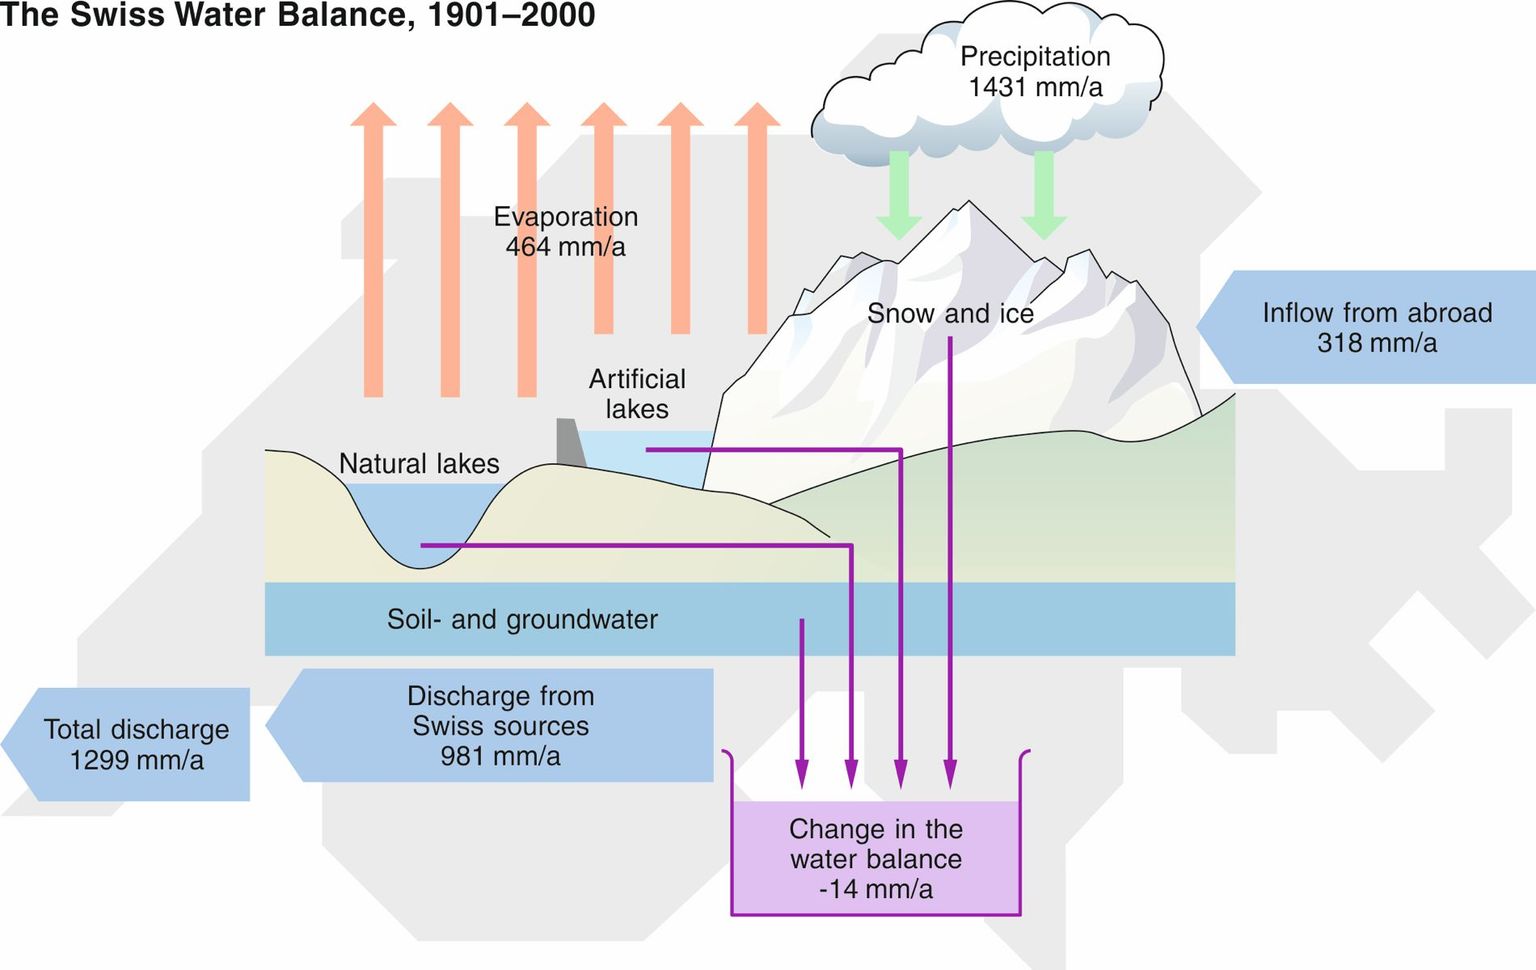 Switzerland’s water balance, 1901-2000 (Hubacher & Schädler 2010). If a layer of water 1 mm deep were spread evenly over the surface of Switzerland, this would require 41.3 million cubic meters of water. Given an average precipitation of 1431 mm/y, nearly 60 billion cubic meters of water per year thus fall on the surface of Switzerland! The change in the reservoir of -14 mm/year means that yearly 600 billion liters of water disappear from Switzerland as a result of glacial retreat. The change in the components of the water balance since 1901 is shown in Appendix 2 (Fig. 12); an illustrated balance sheet is located in Appendix 4 (Fig. 14).